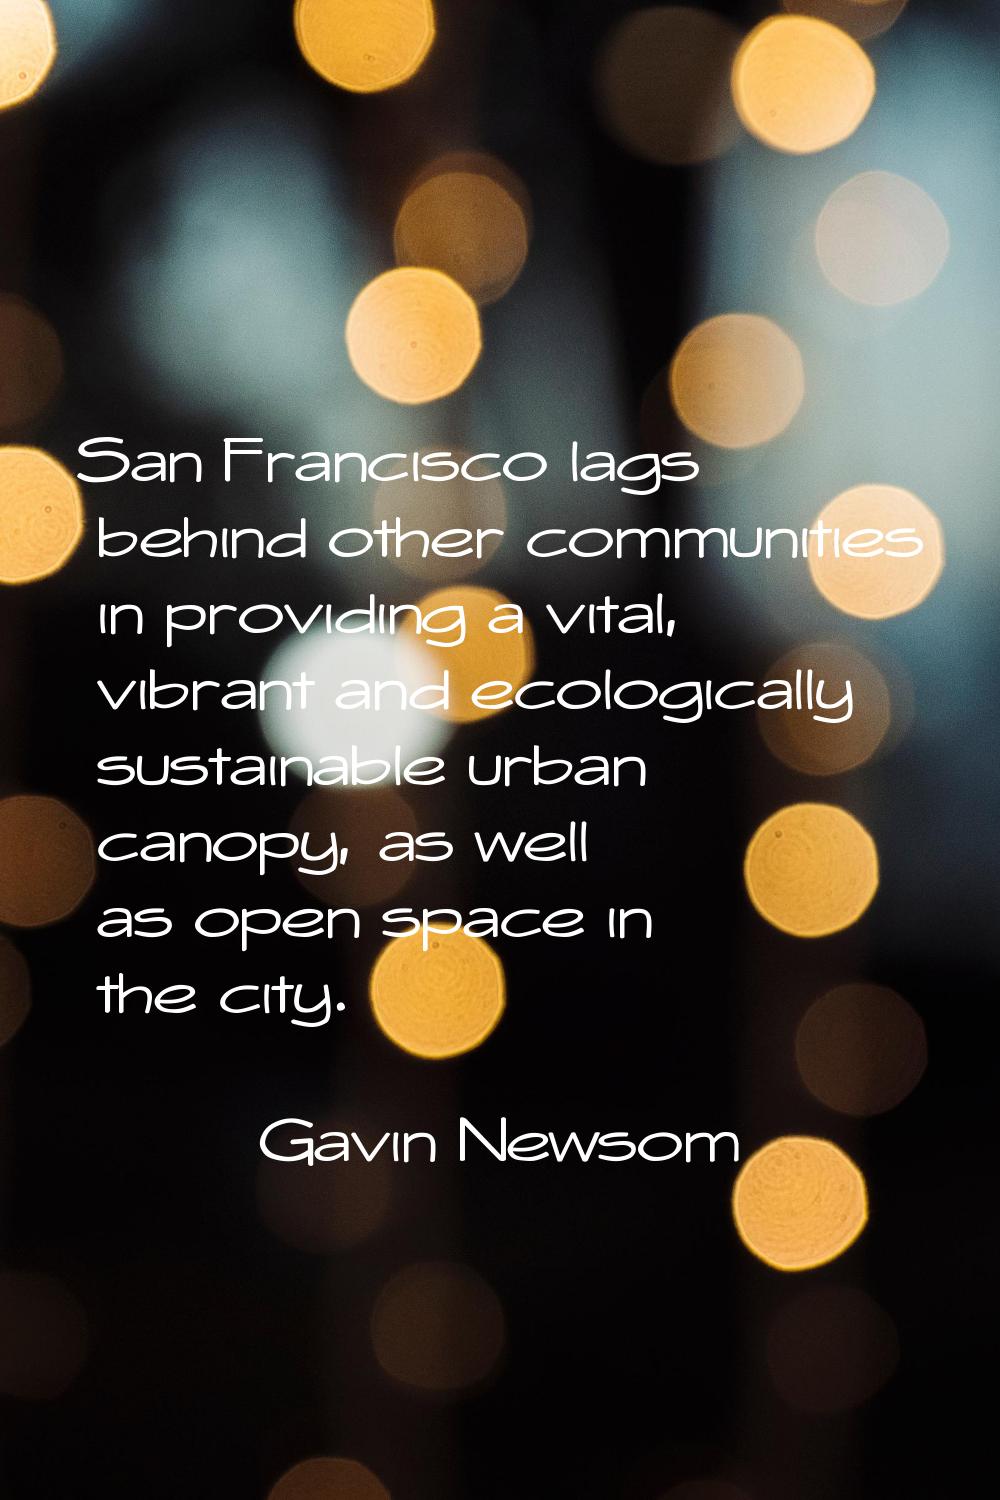 San Francisco lags behind other communities in providing a vital, vibrant and ecologically sustaina